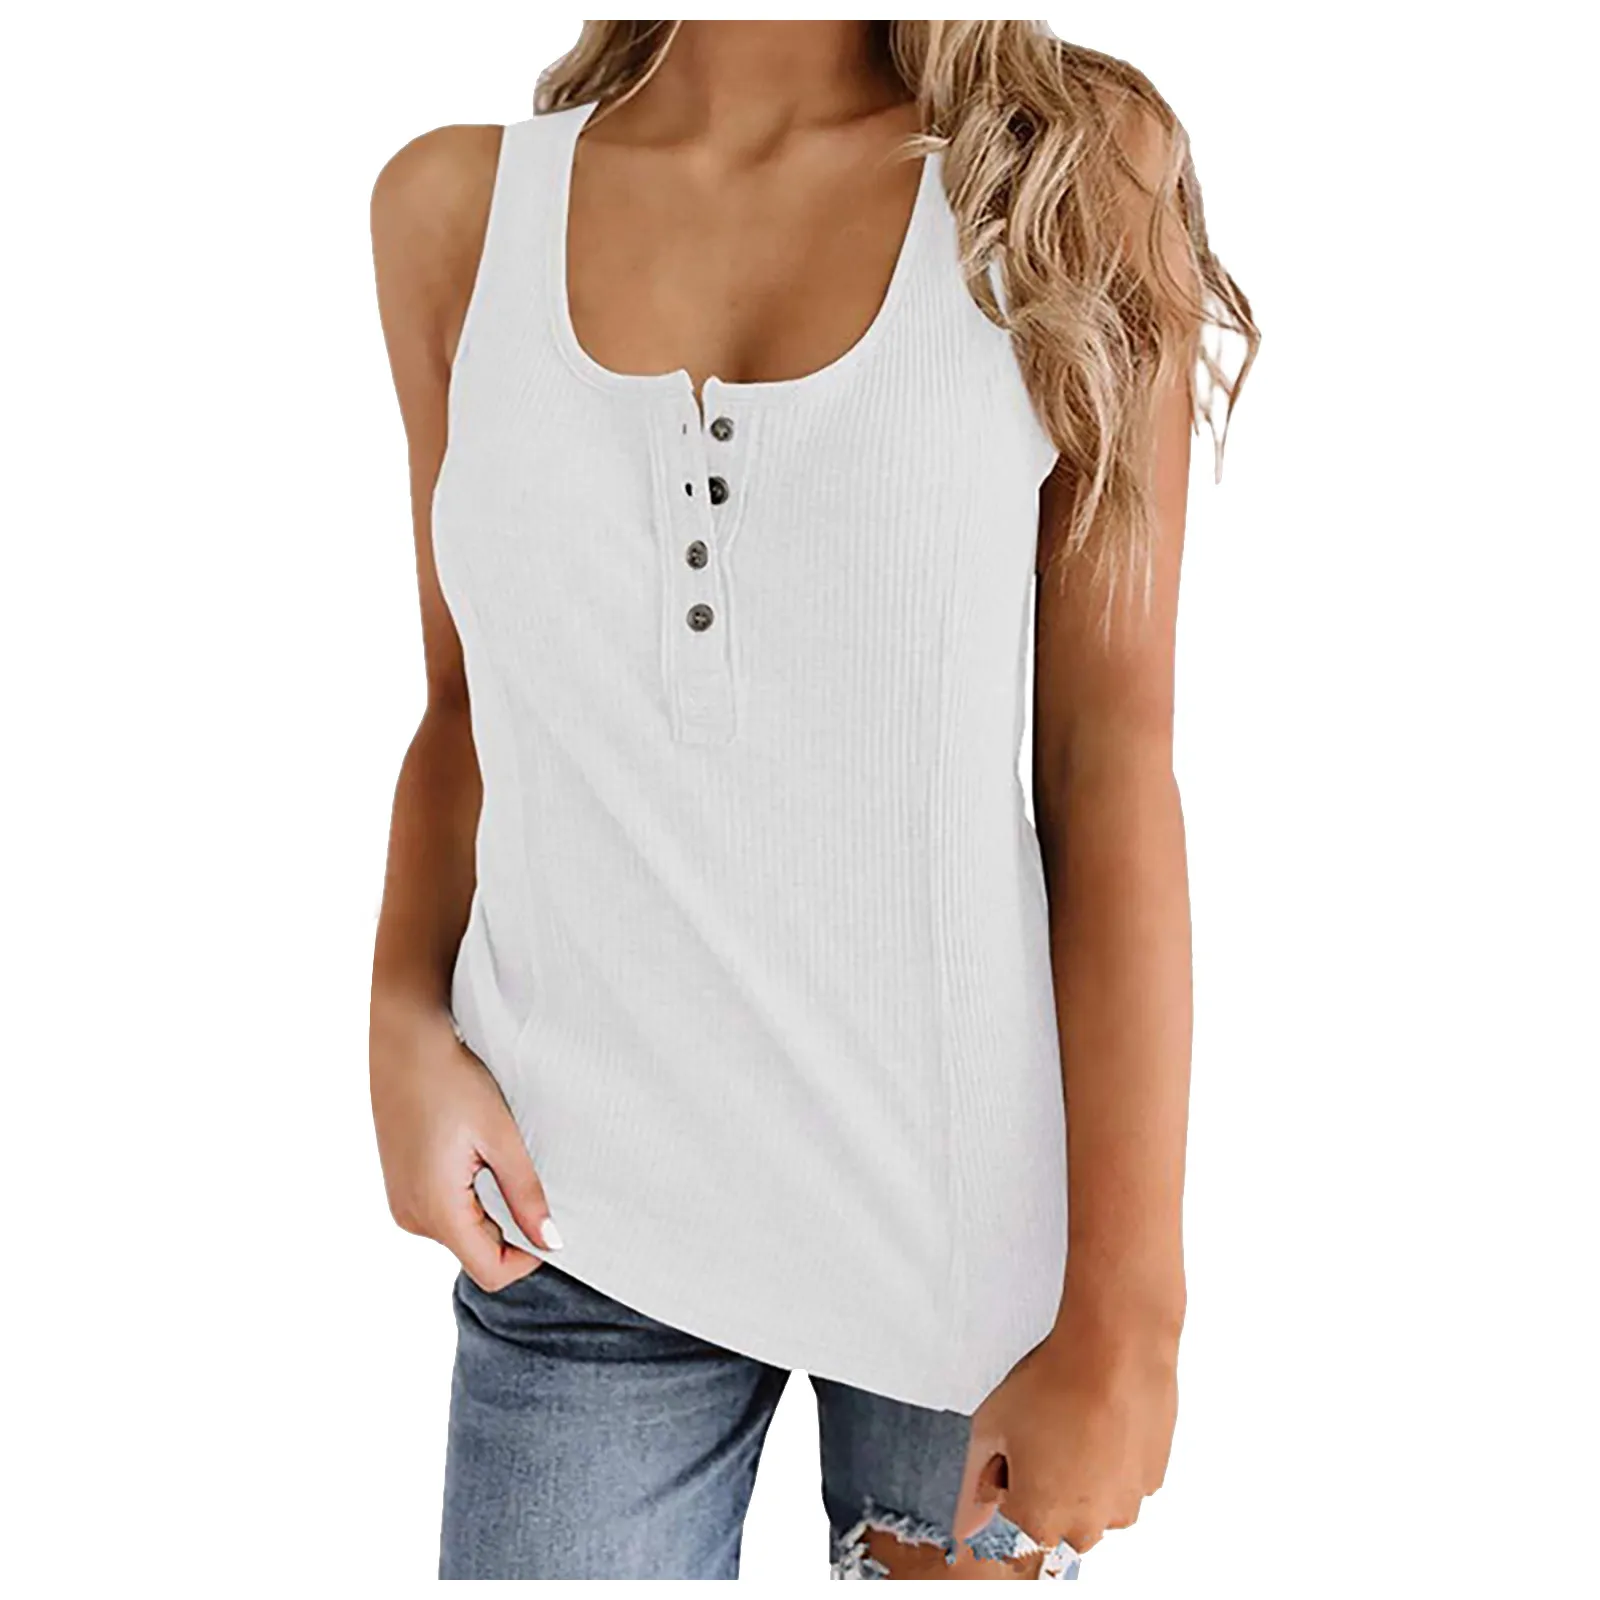 Plus Size Fashion Womens Round Neck Sleeveless Camisole Button Solid Color Vest Blouse Easy Tops  New Fashion Simple Women'S Top